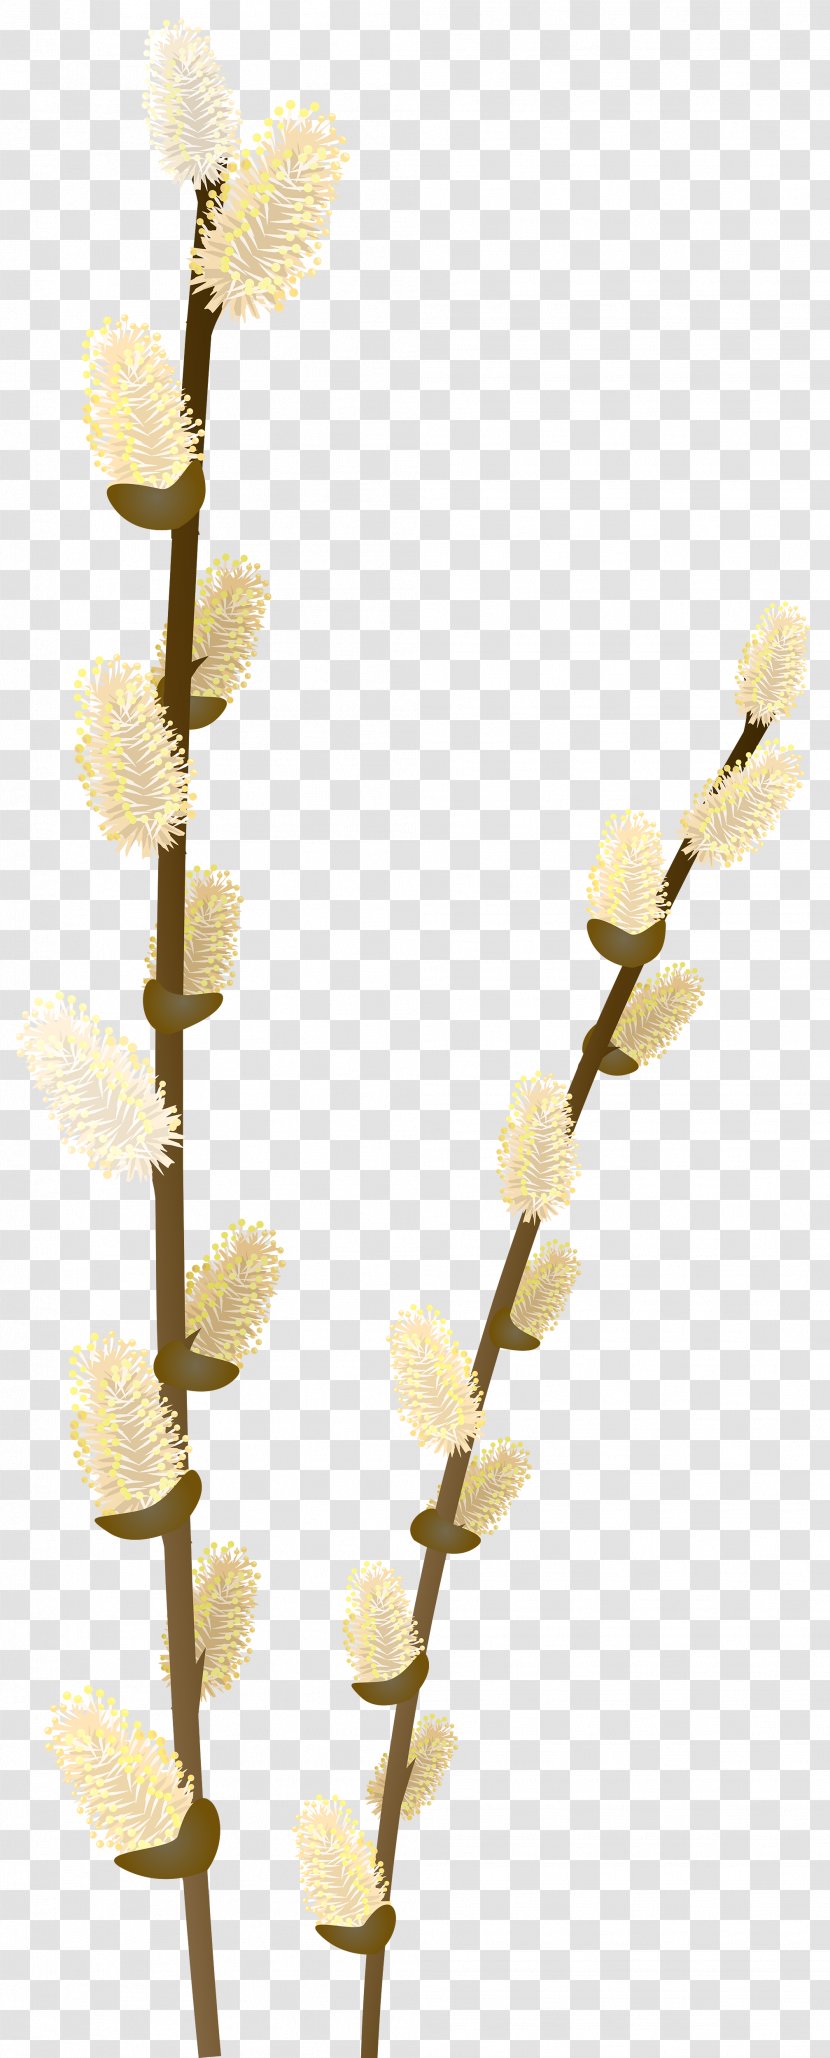 Branch Weeping Willow Tree Clip Art - Transparent Image Transparent PNG